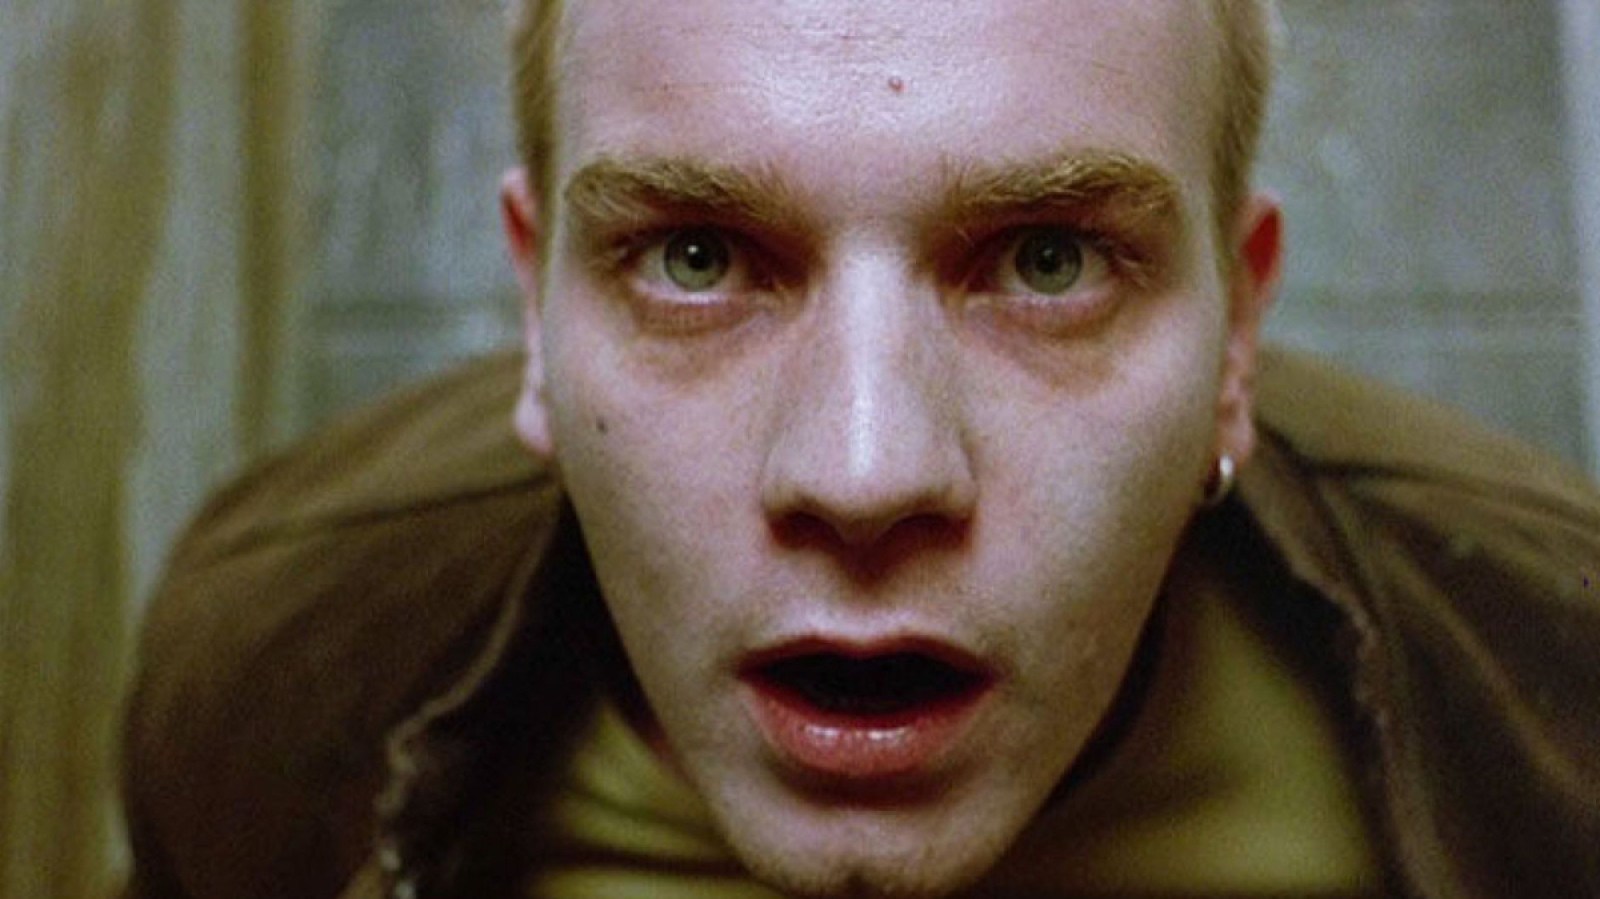 A close up of a white man looking upwards with red bags around his eyes in "Trainspotting"